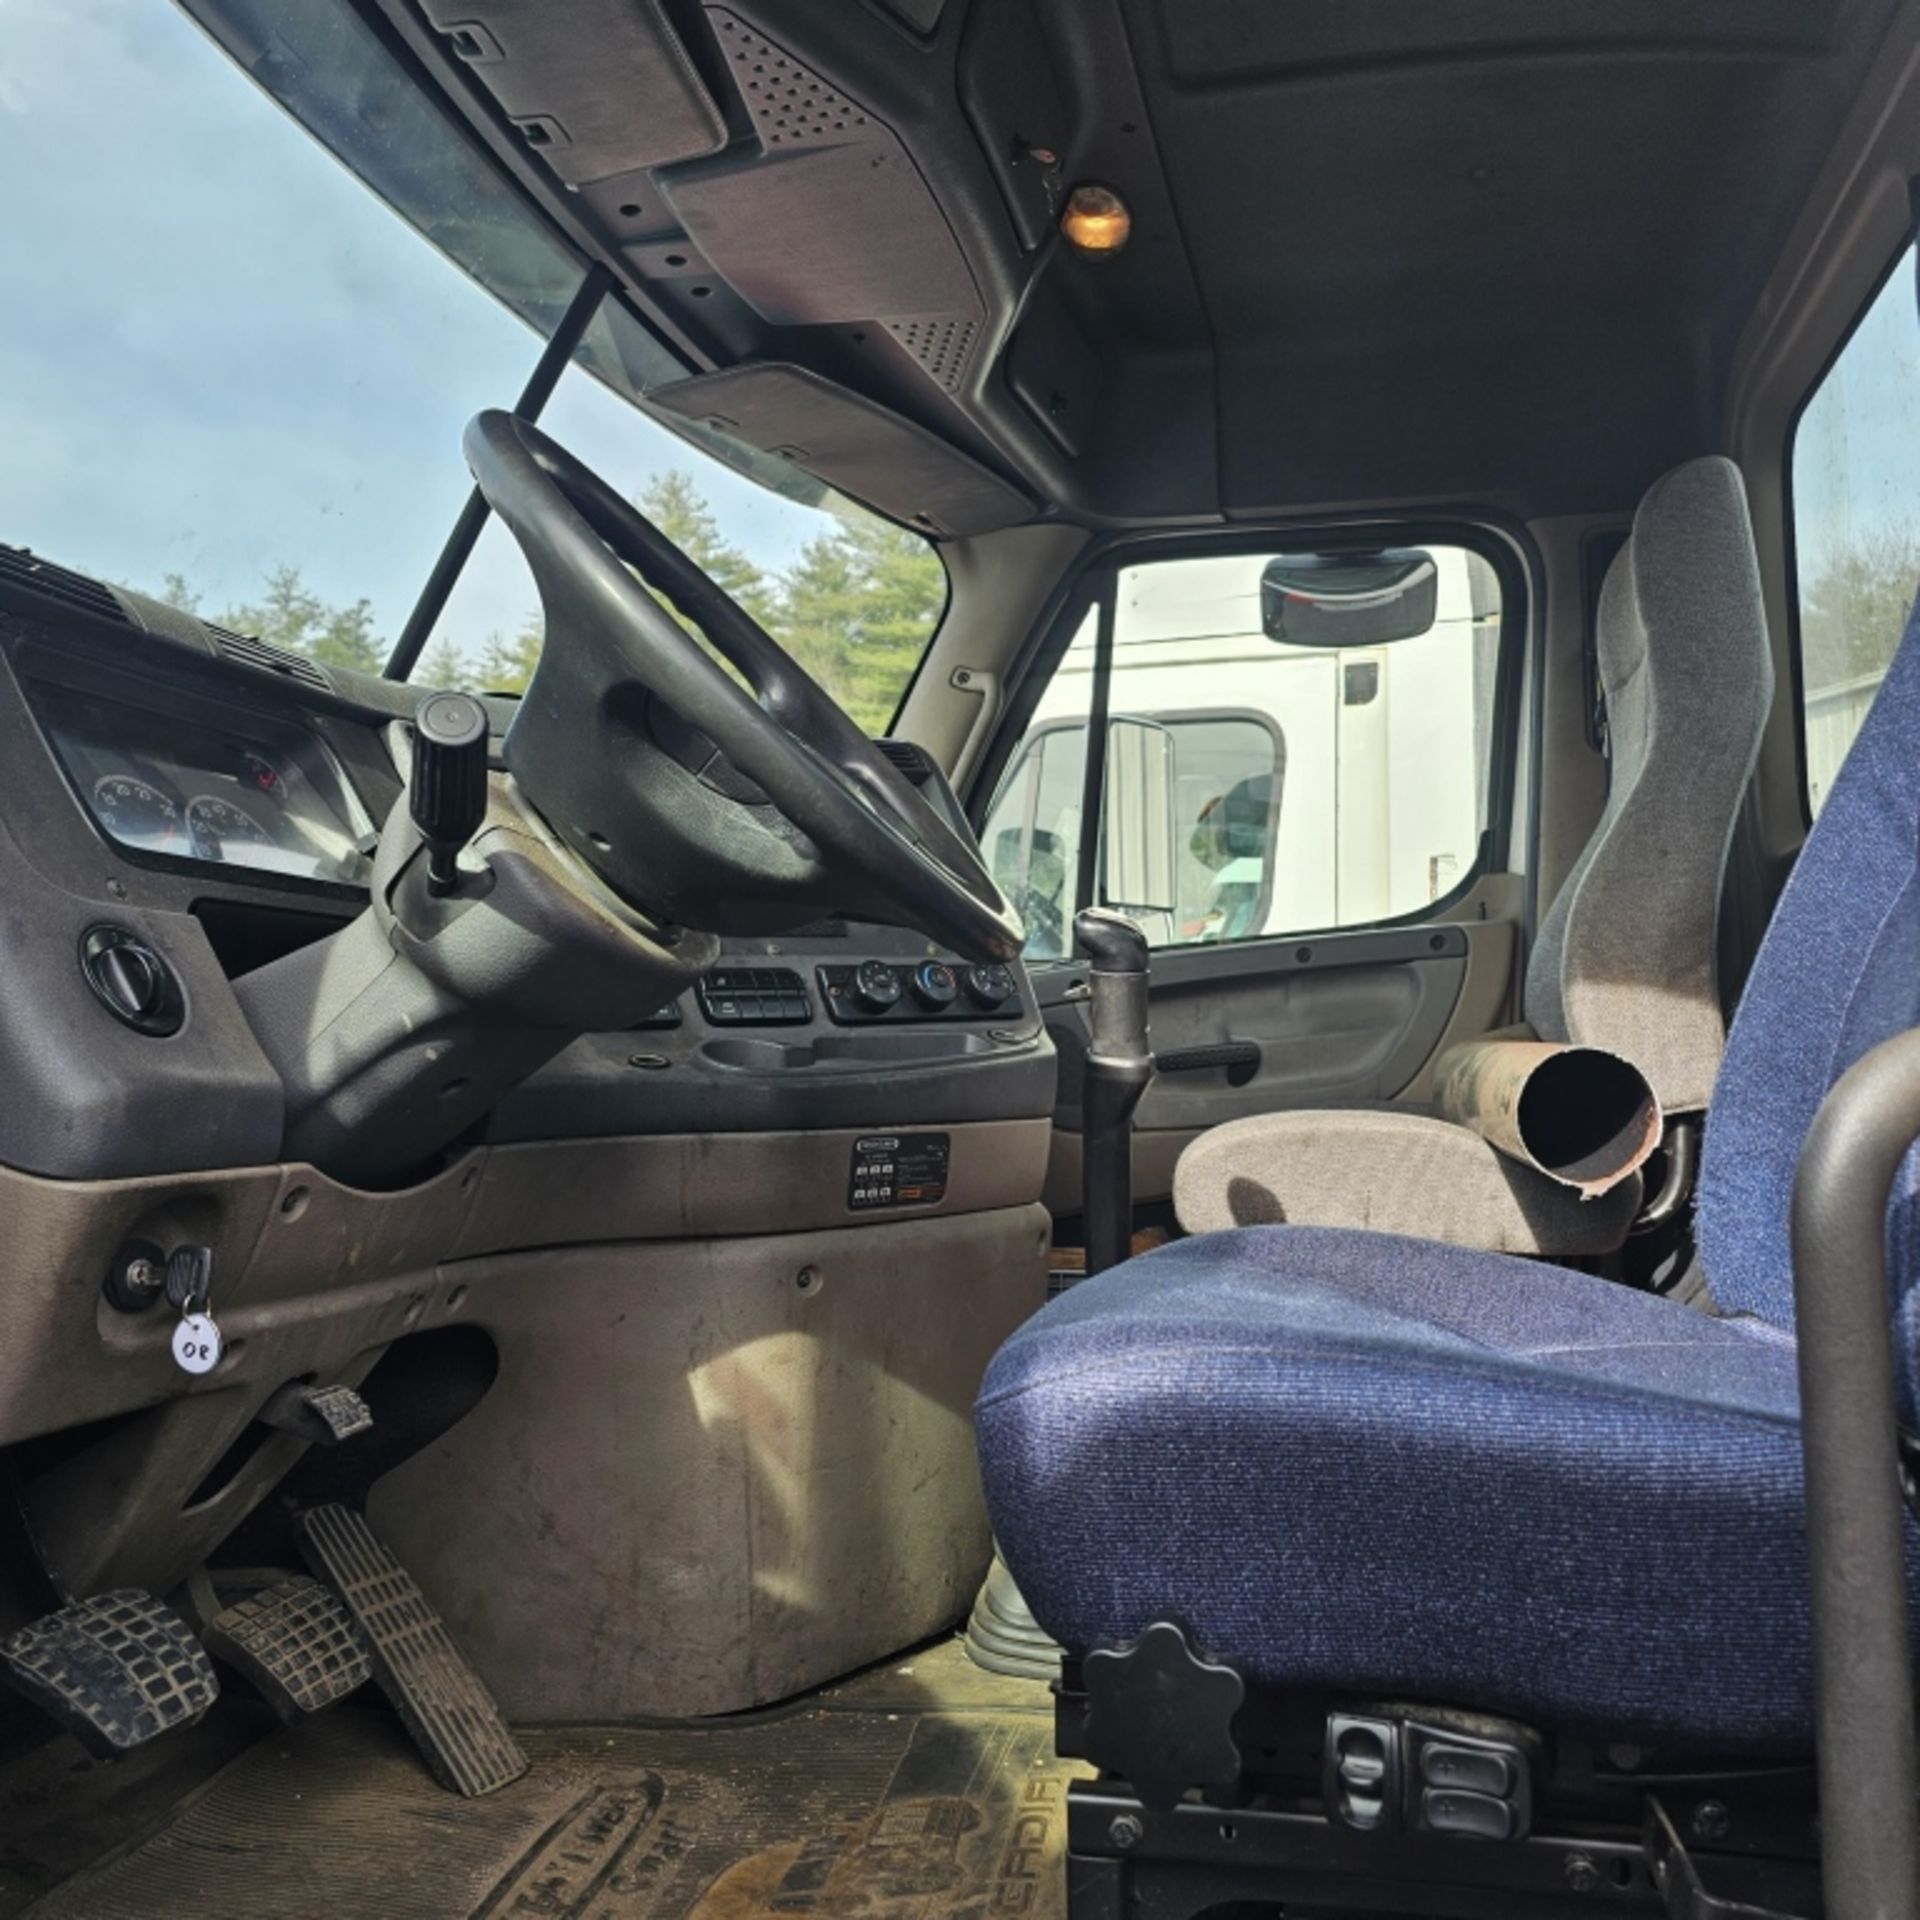 2009 Freightliner Cascadia - Image 7 of 10